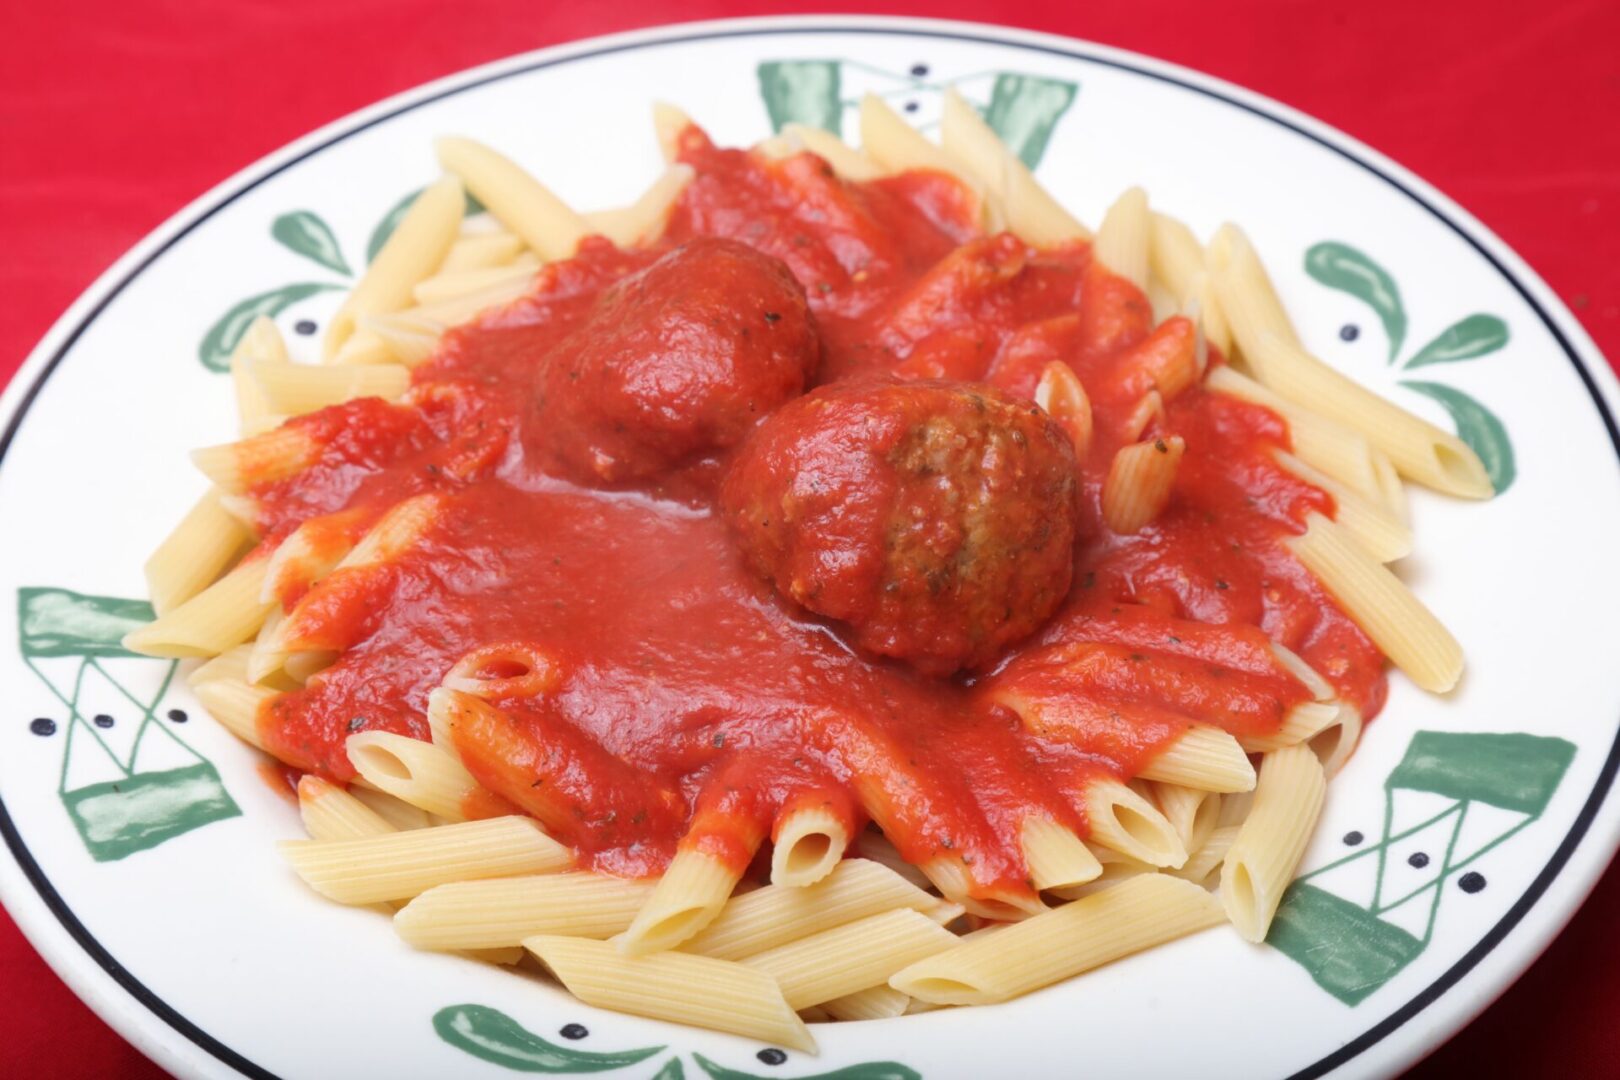 A plate of pasta and meatballs on top of the table.